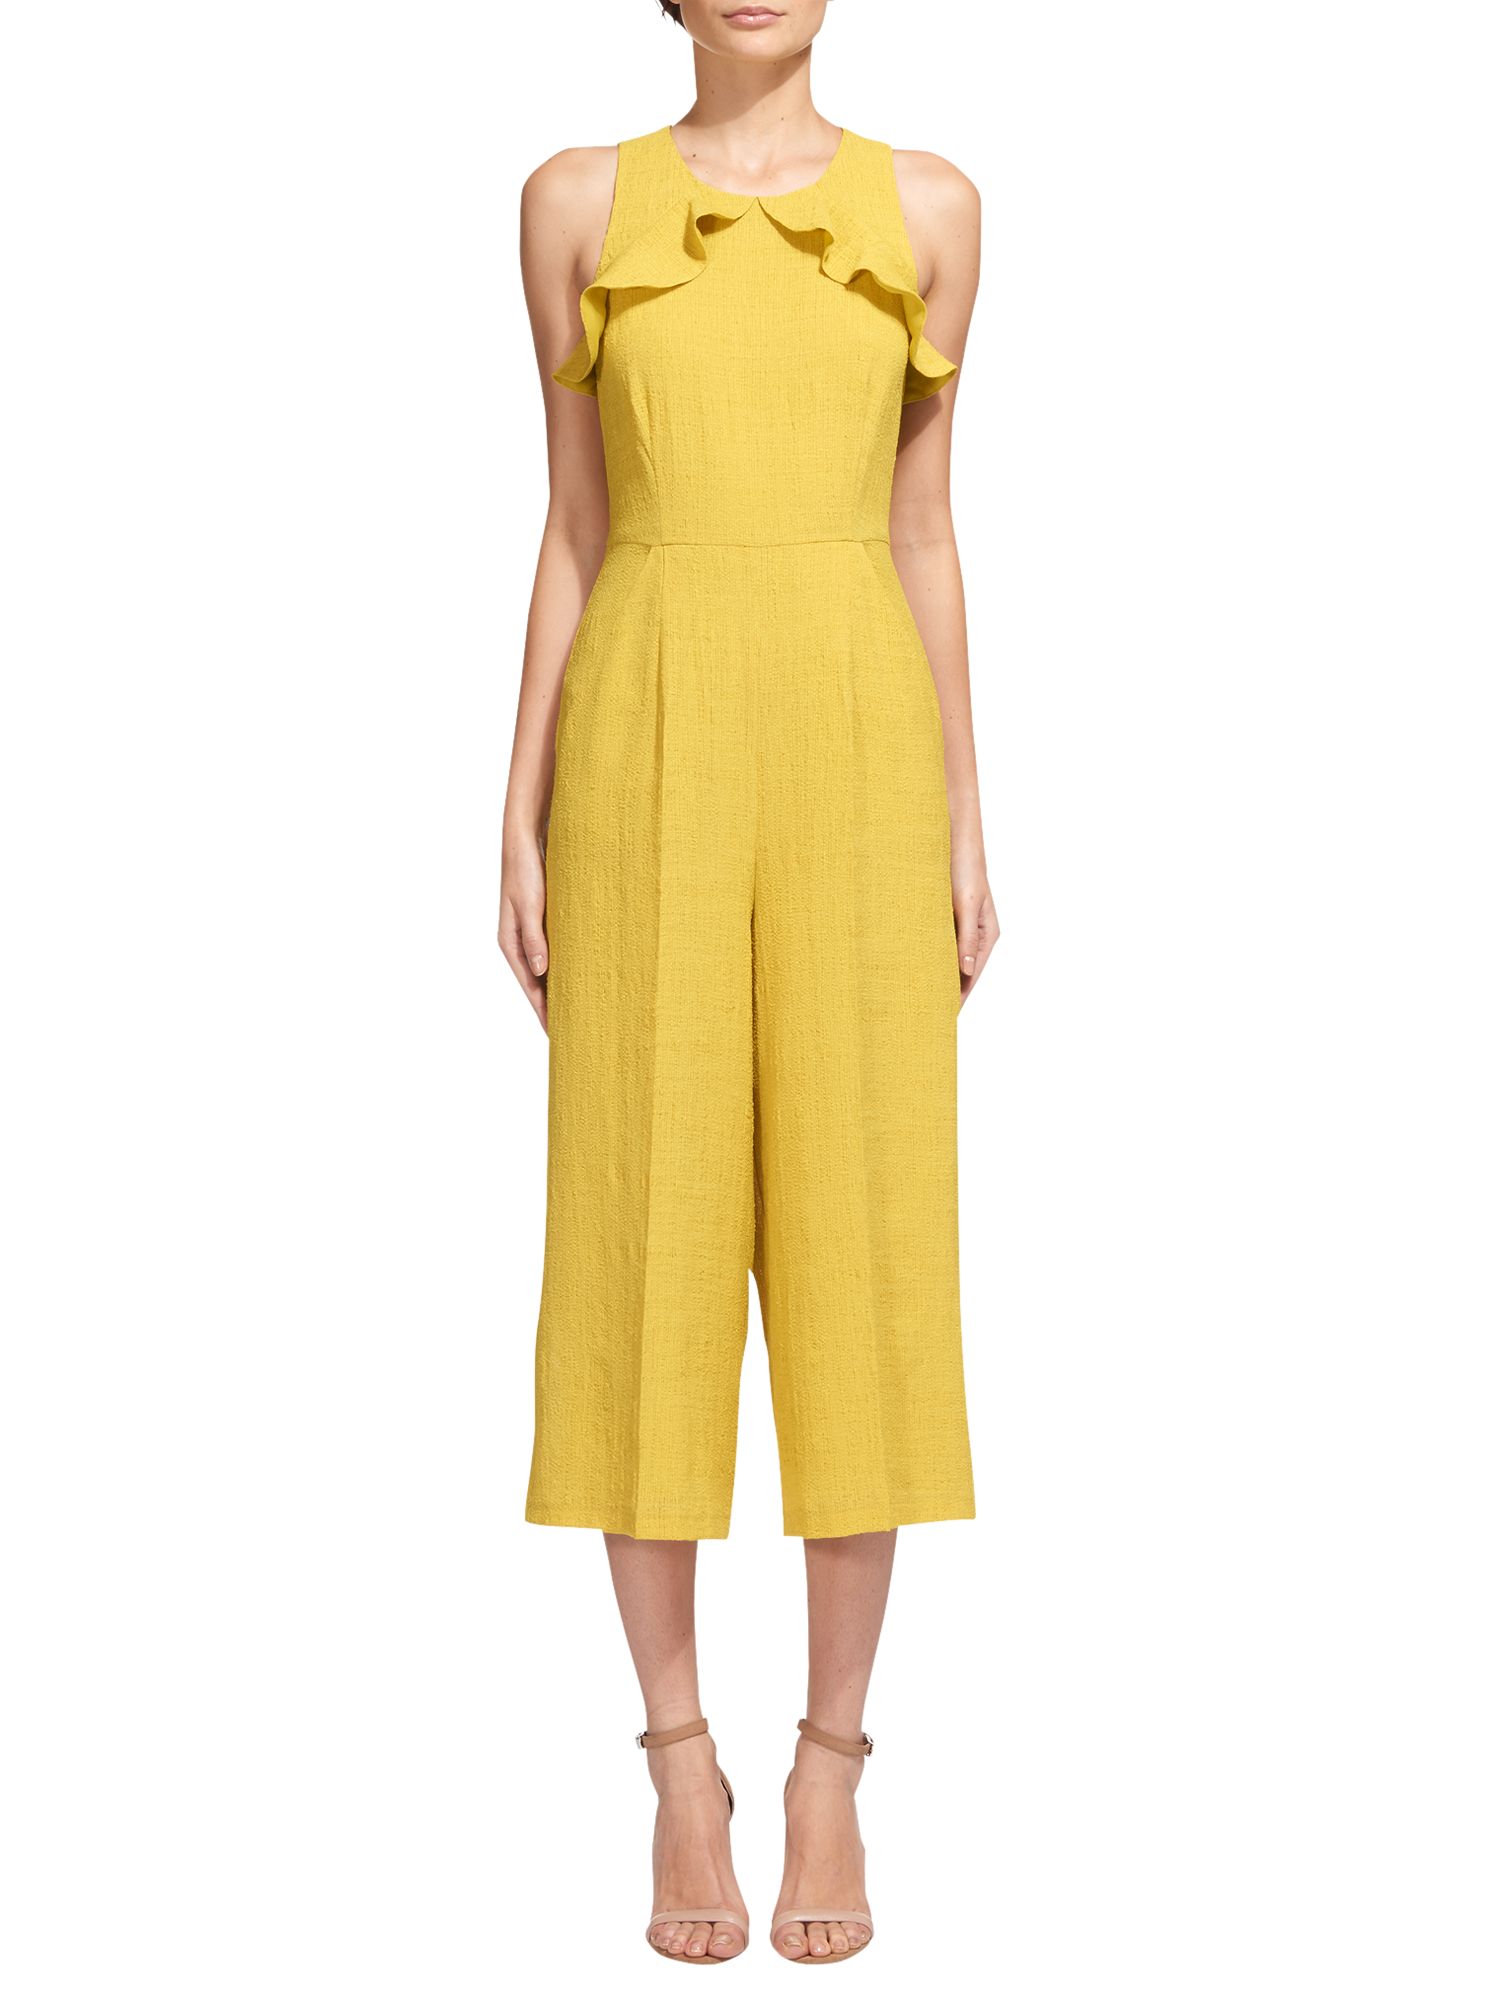 Whistles Mae Frill Detail Jumpsuit, Yellow, 8